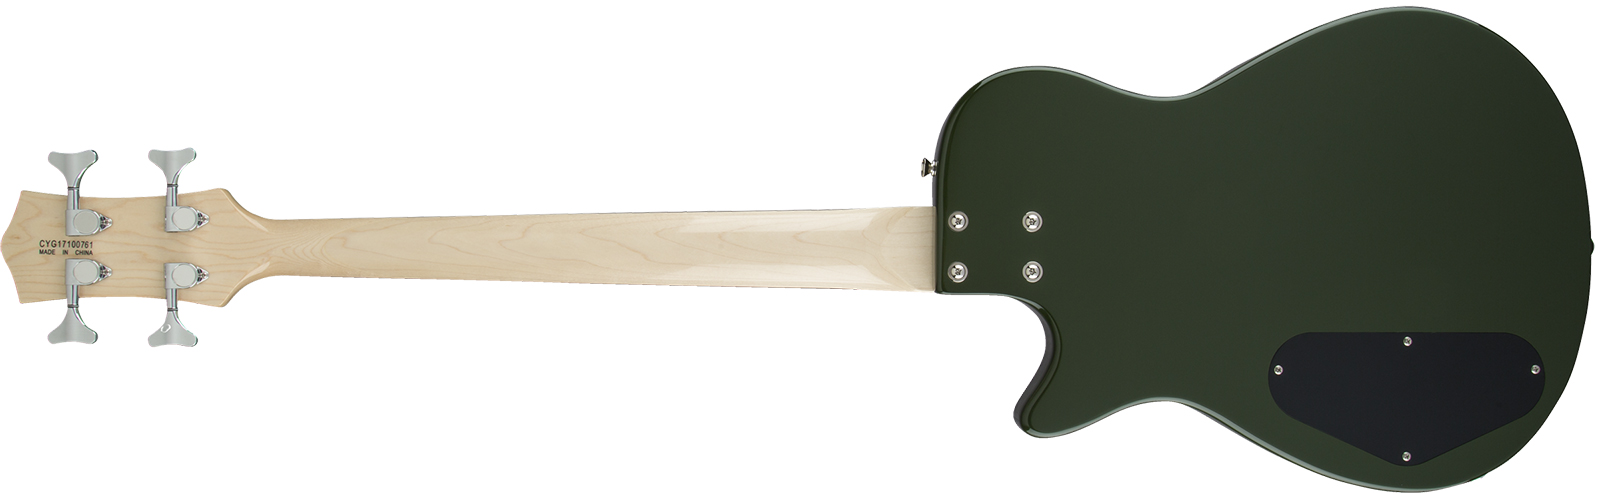 Gretsch G2220 Junior Jet Bass Ii Short Scale Electromatic Wal - Torino Green - Electric bass for kids - Variation 1